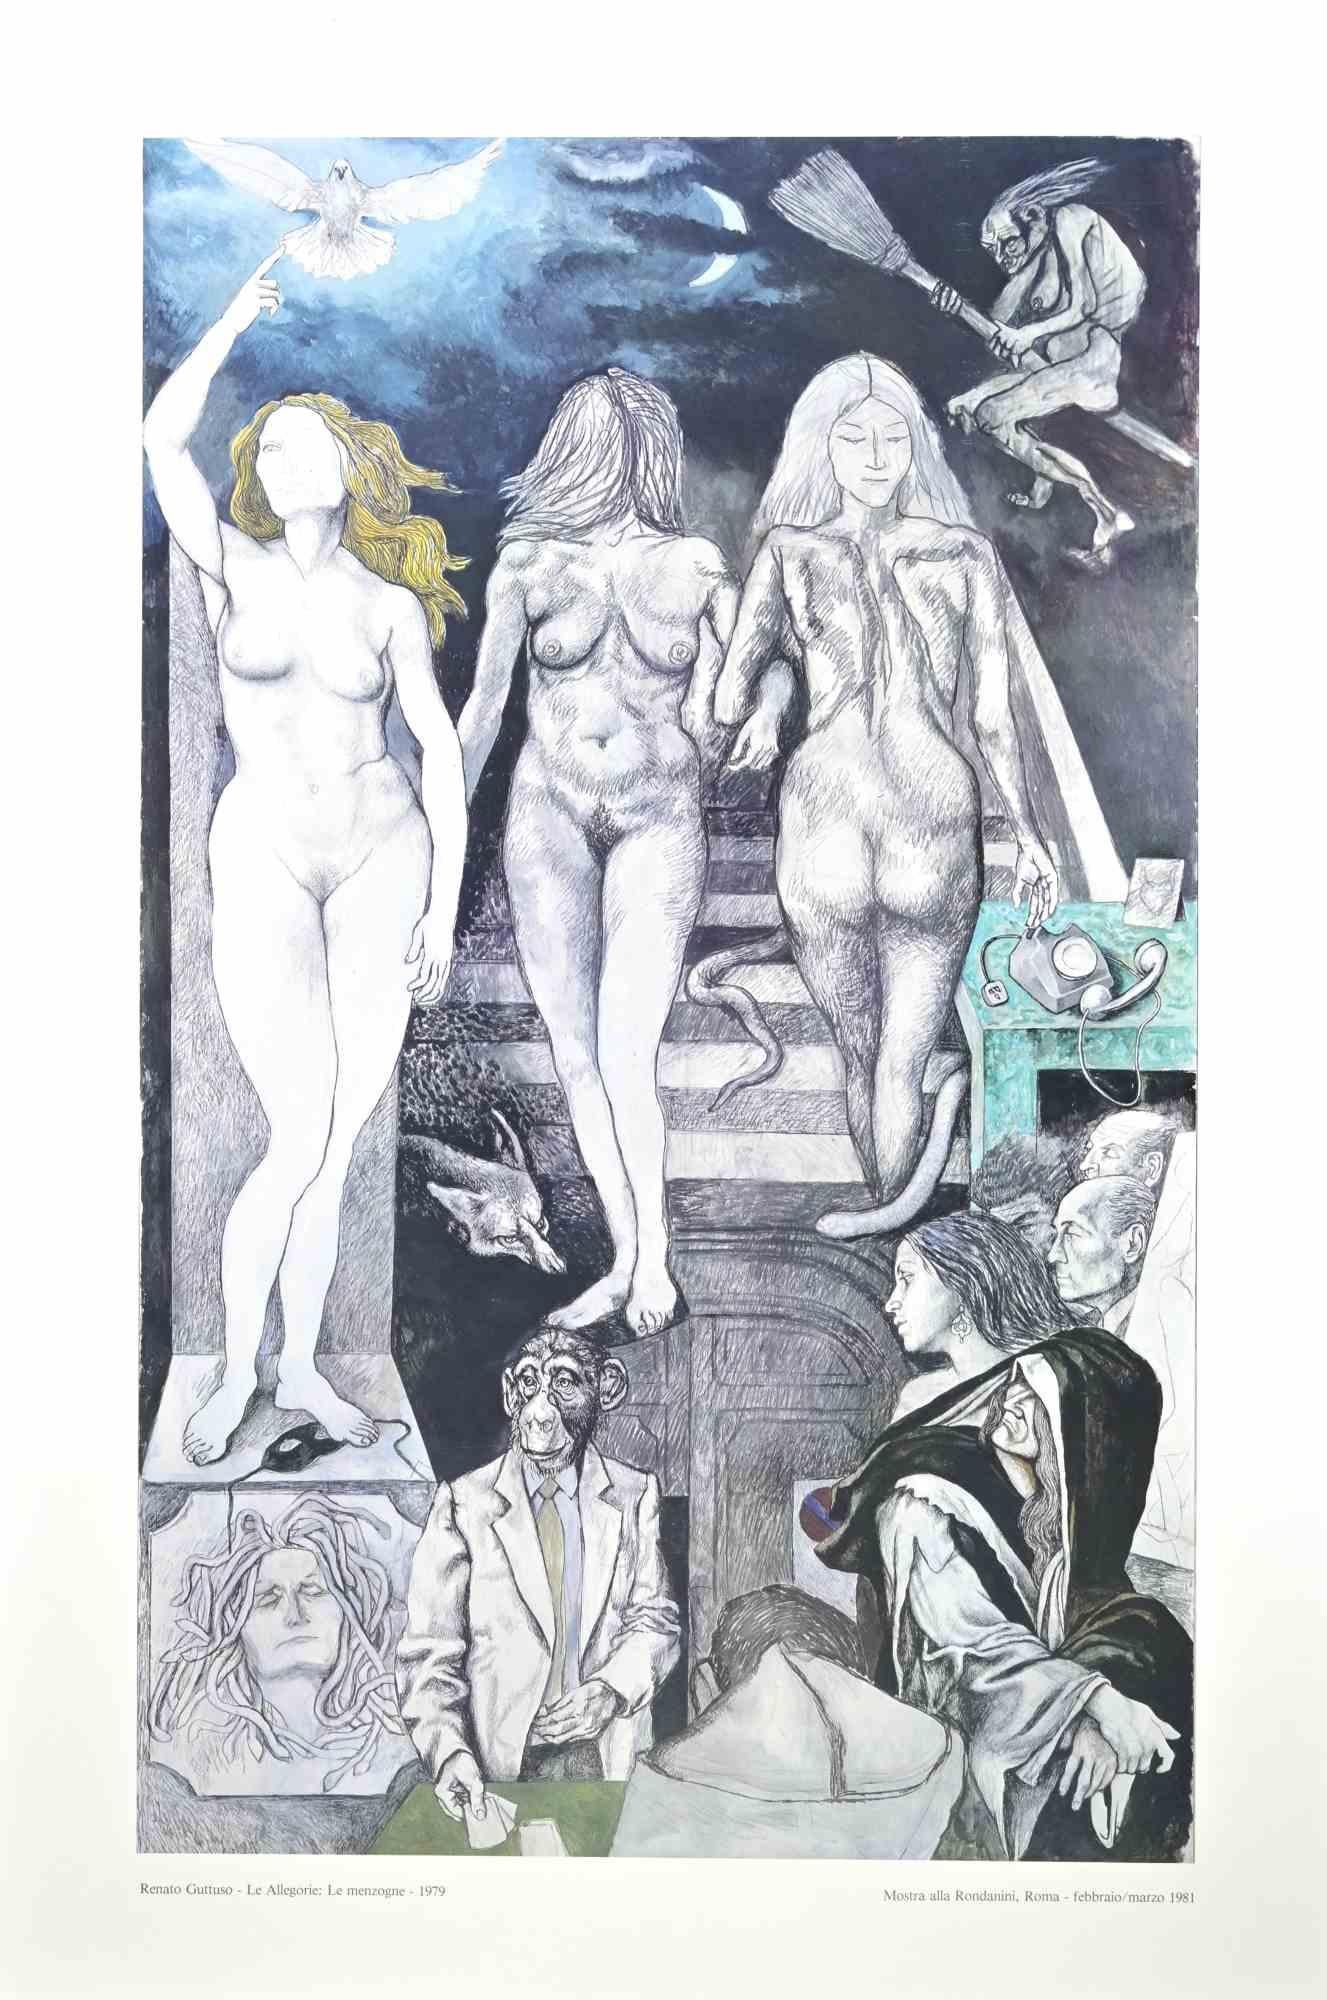 Allegories: Lies is a vintage poster realized by the Italian artist  Renato Guttuso  (Bagheria, 1911 – Rome, 1987) in  1981.

Colored Offset on paper. 

The artwork was realized on the occasion of the exhibition realized in 1981 at Galleria